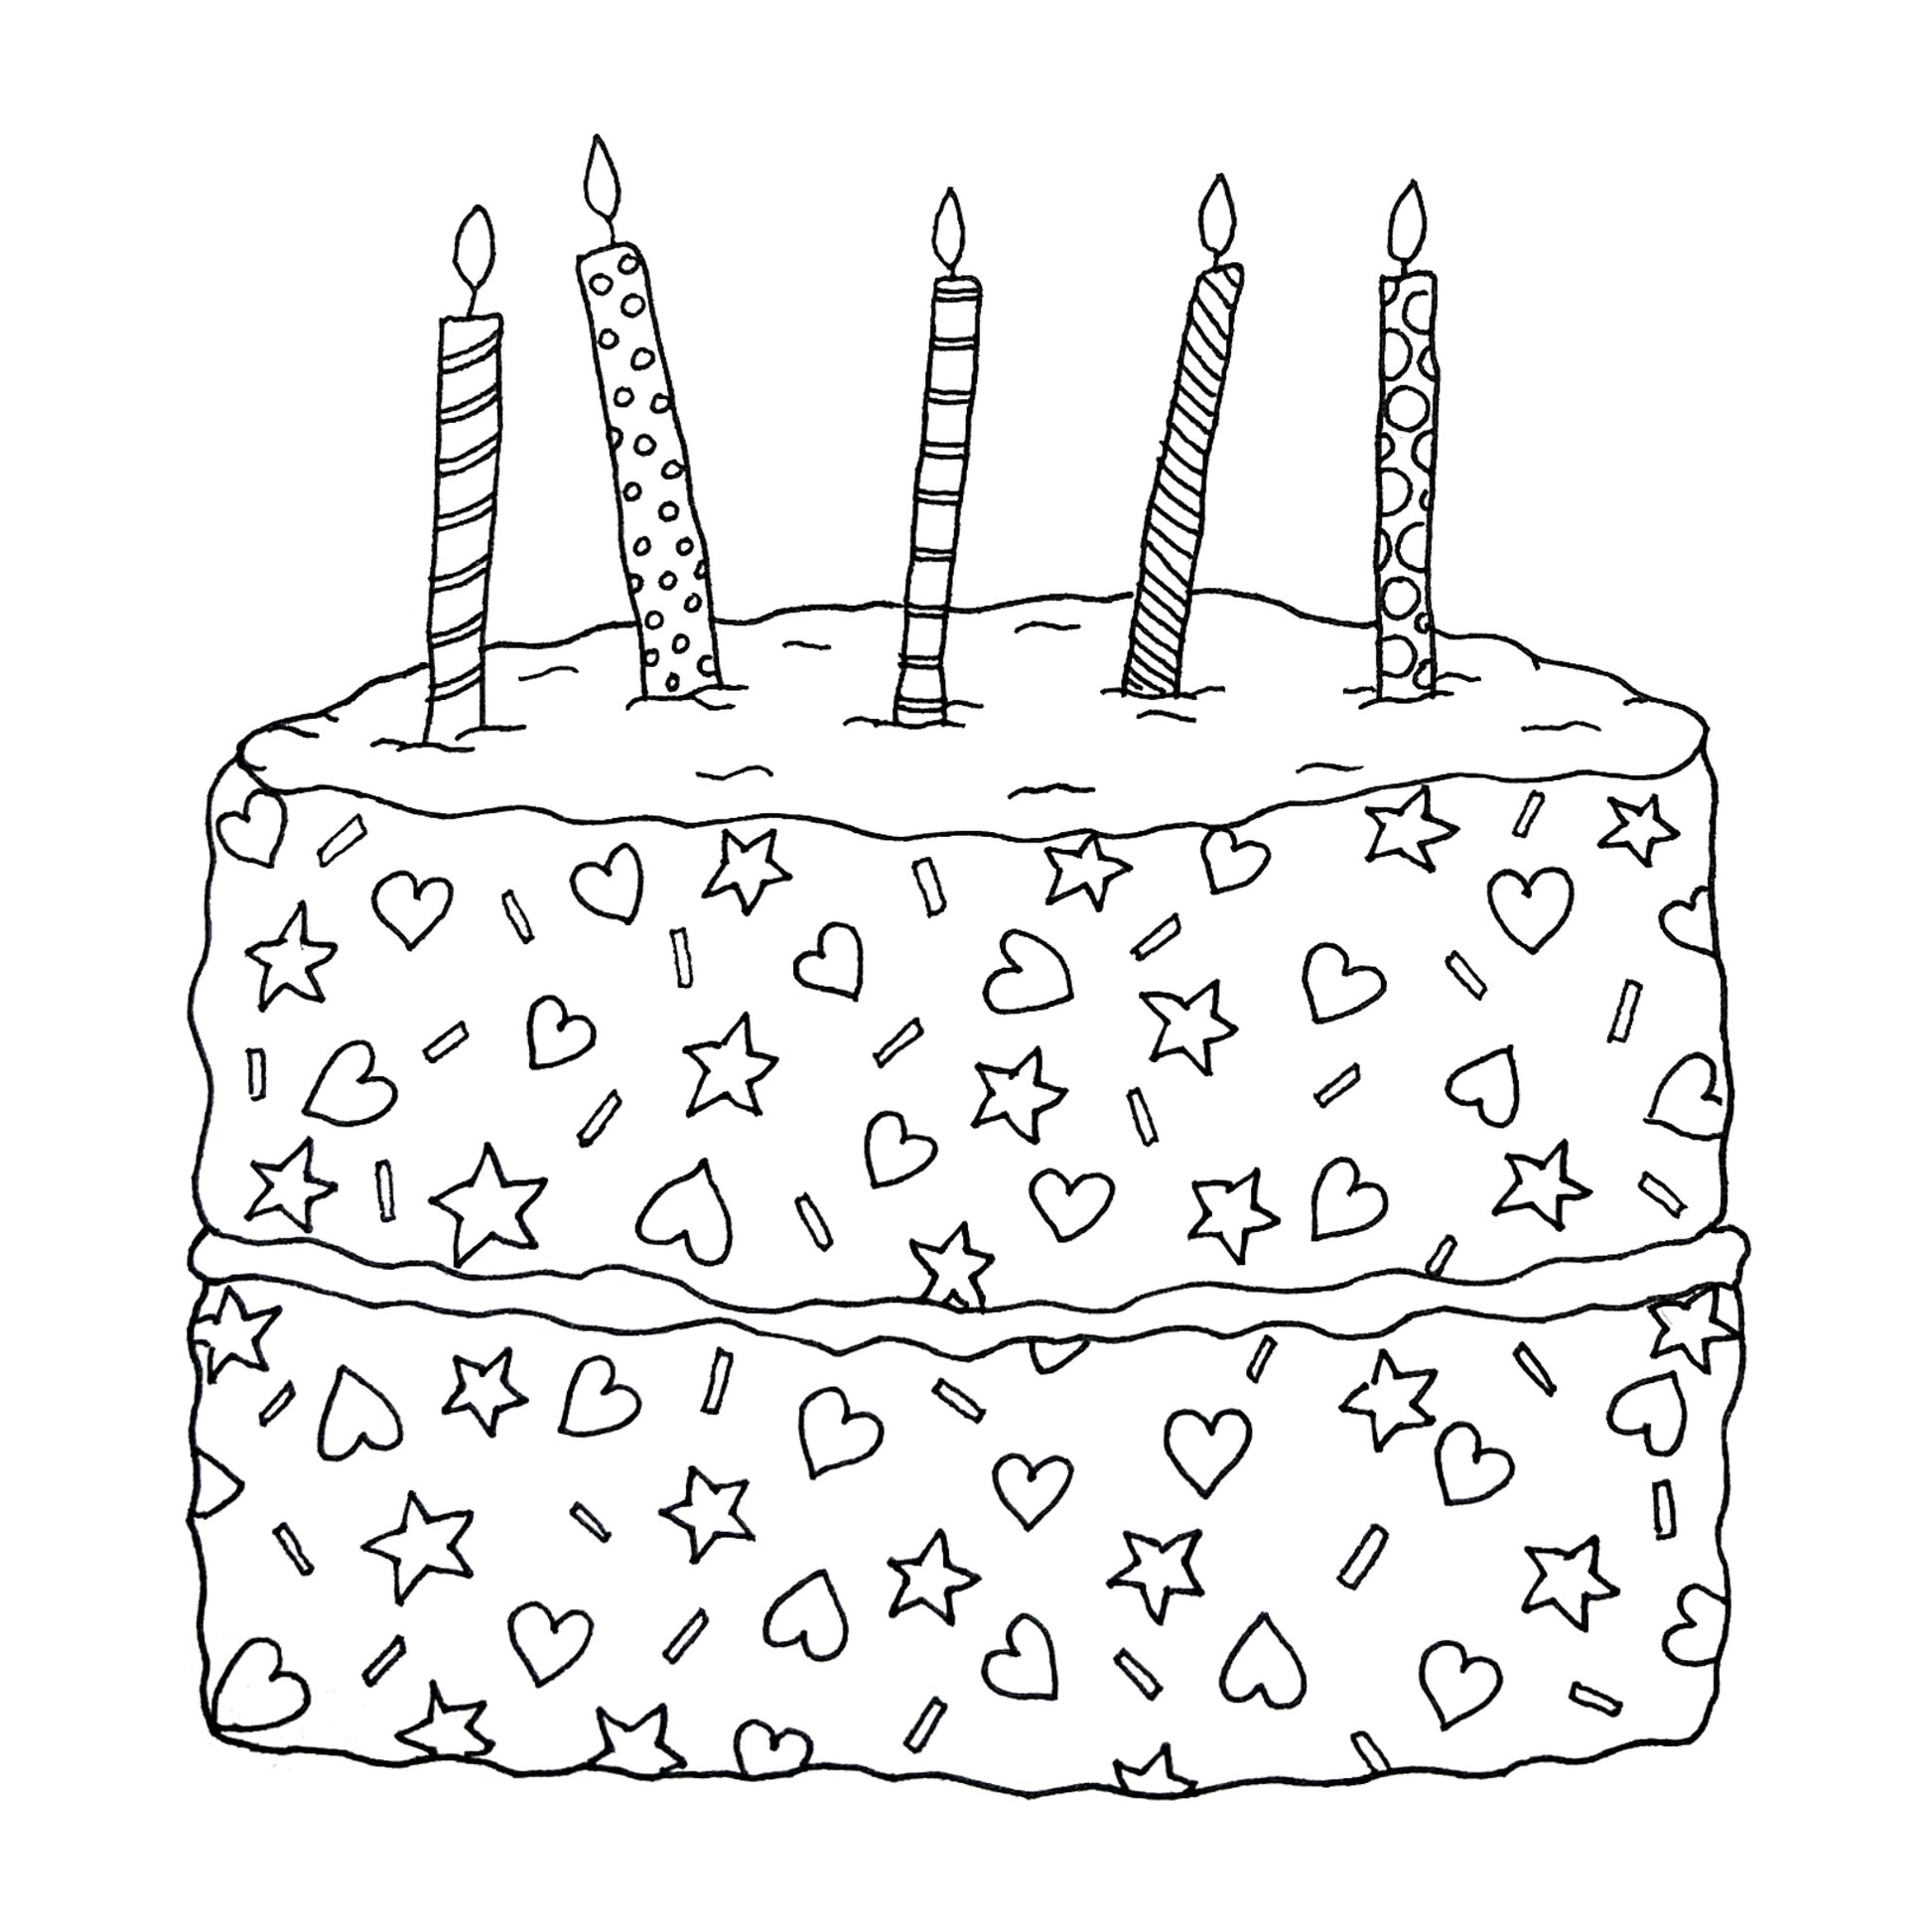 Illustration shows a 2 tier birthday cake made from sprinkles, hearts and stars with 5 candles made with stripes and dots. image is entirely black and white. 